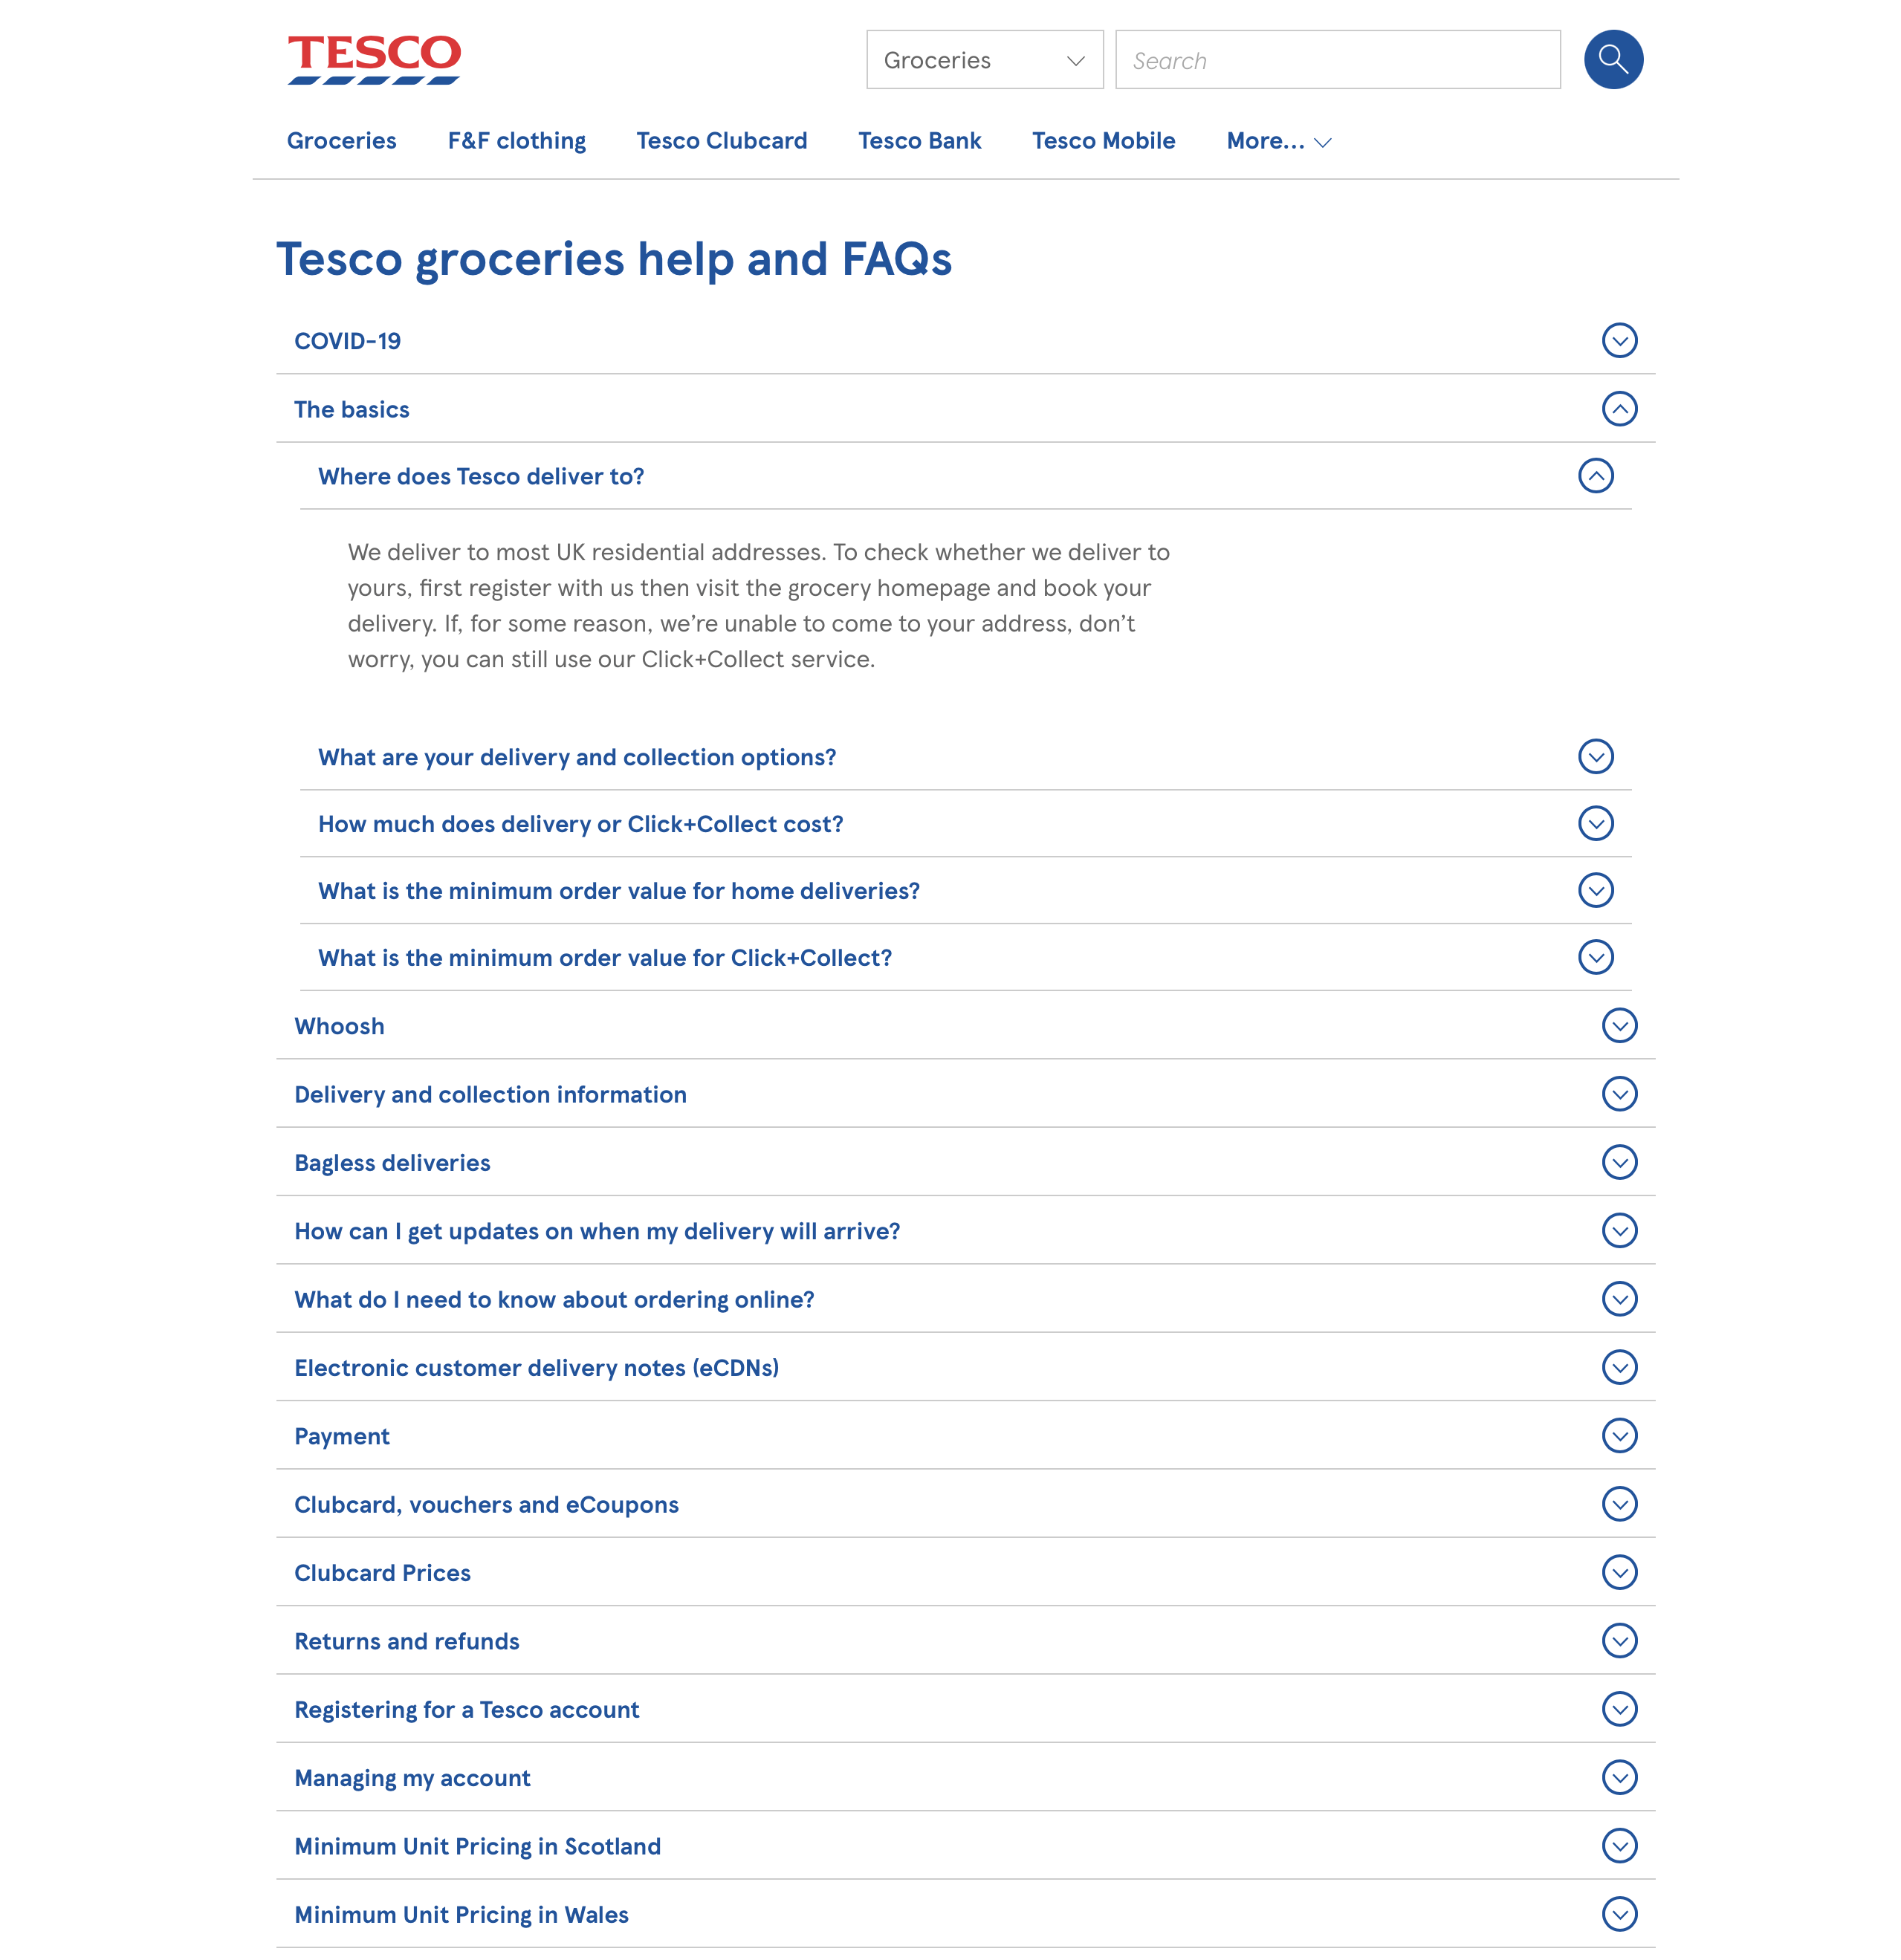 Tesco Superstores in the UK, FAQ Page